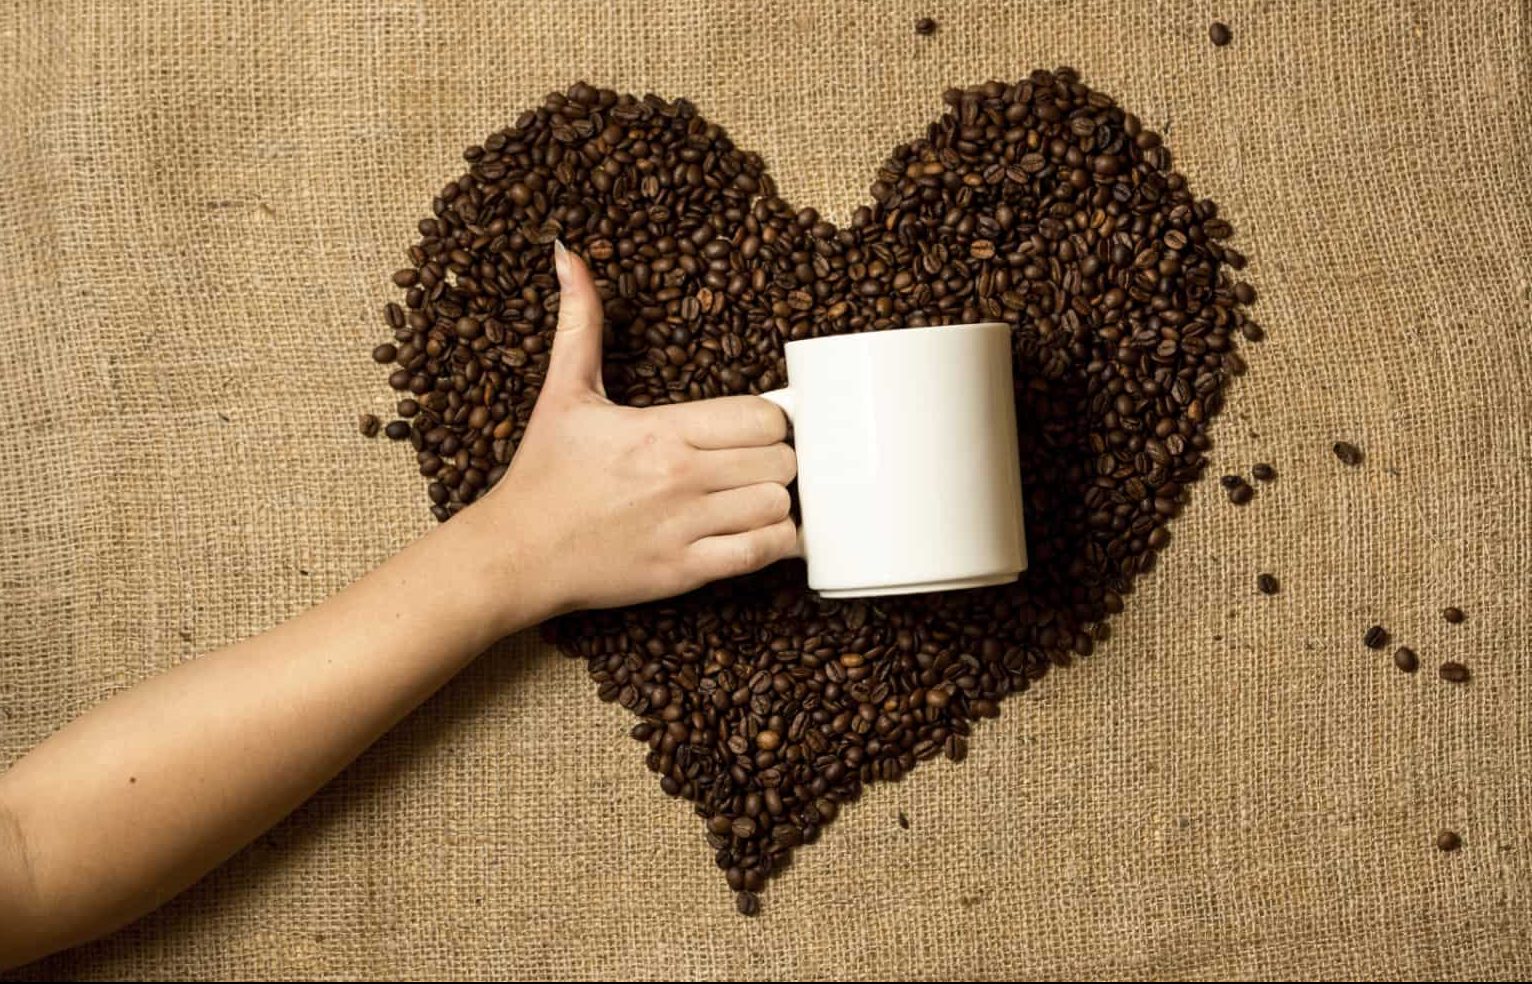 benefit-of-coffee-how-to-drink-coffee-for-health